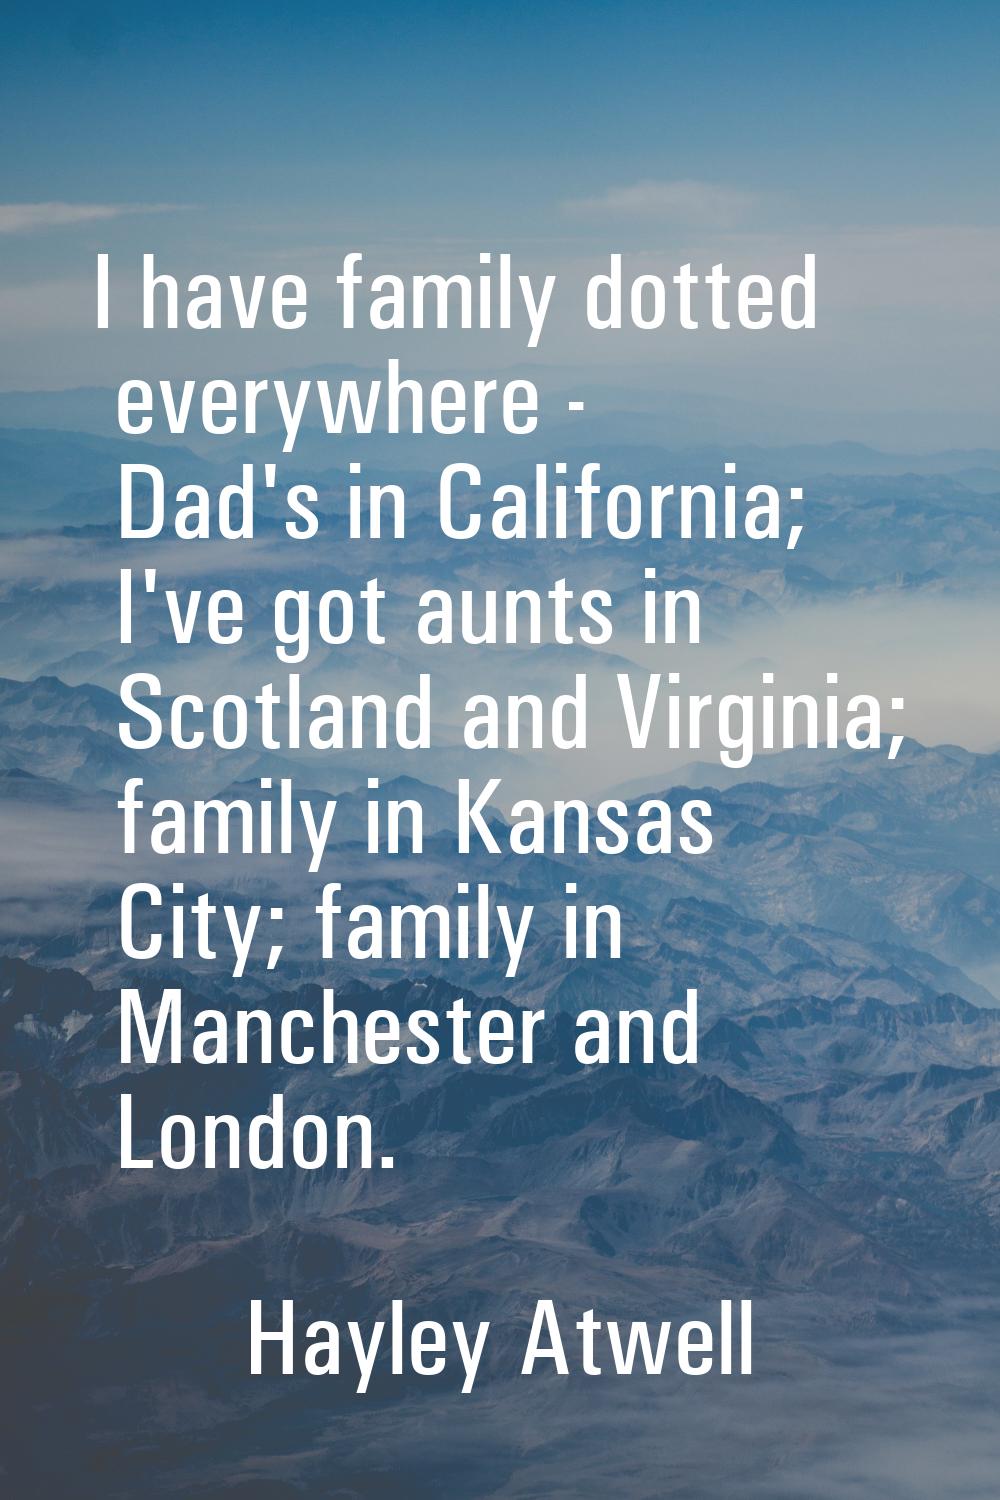 I have family dotted everywhere - Dad's in California; I've got aunts in Scotland and Virginia; fam